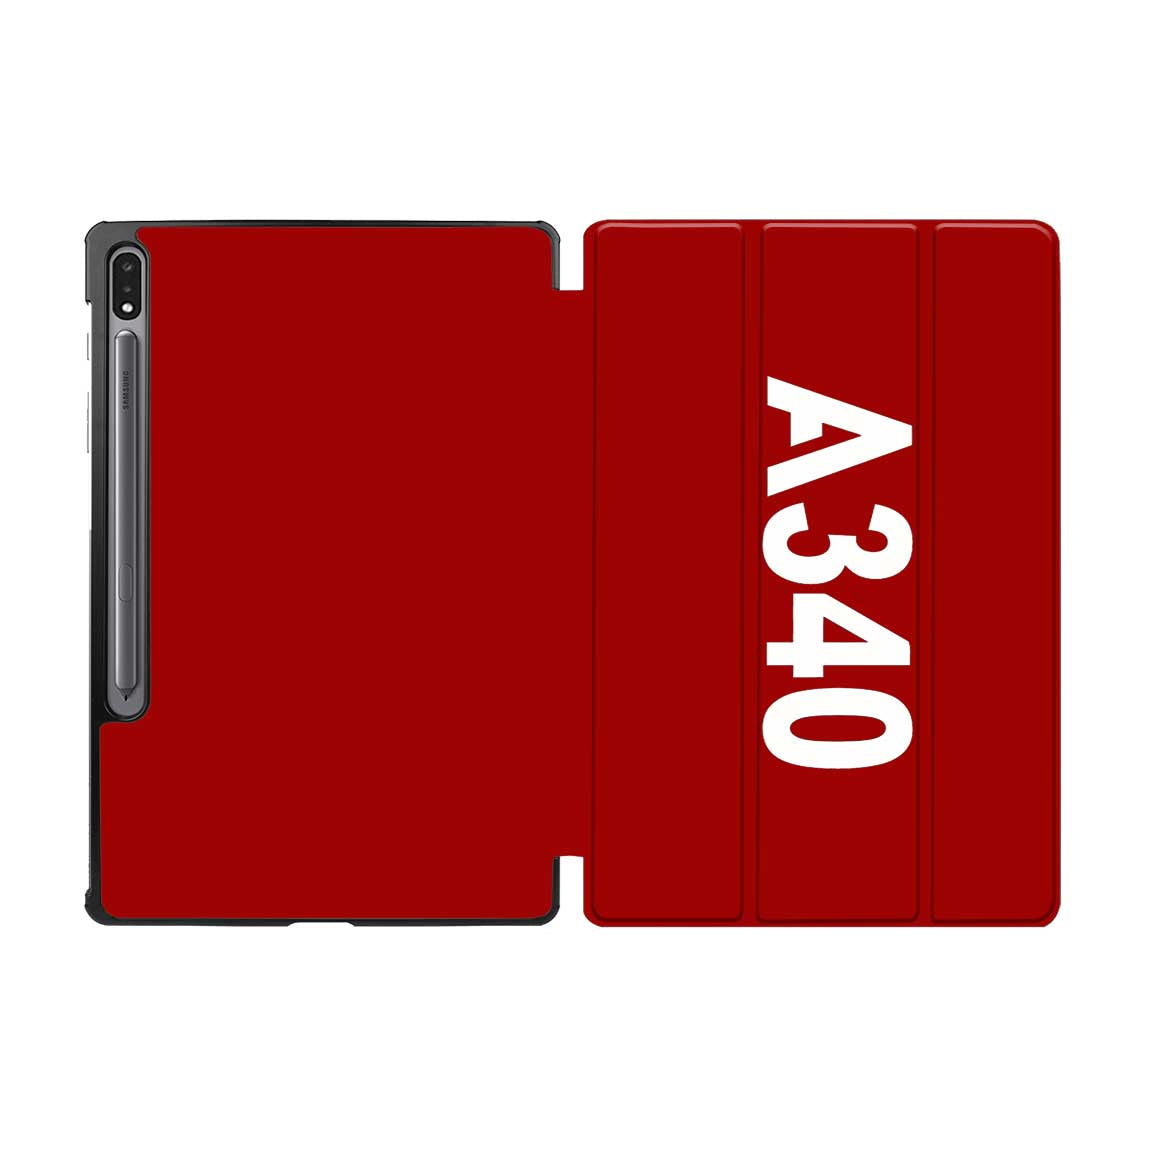 A340 Text Designed Samsung Tablet Cases